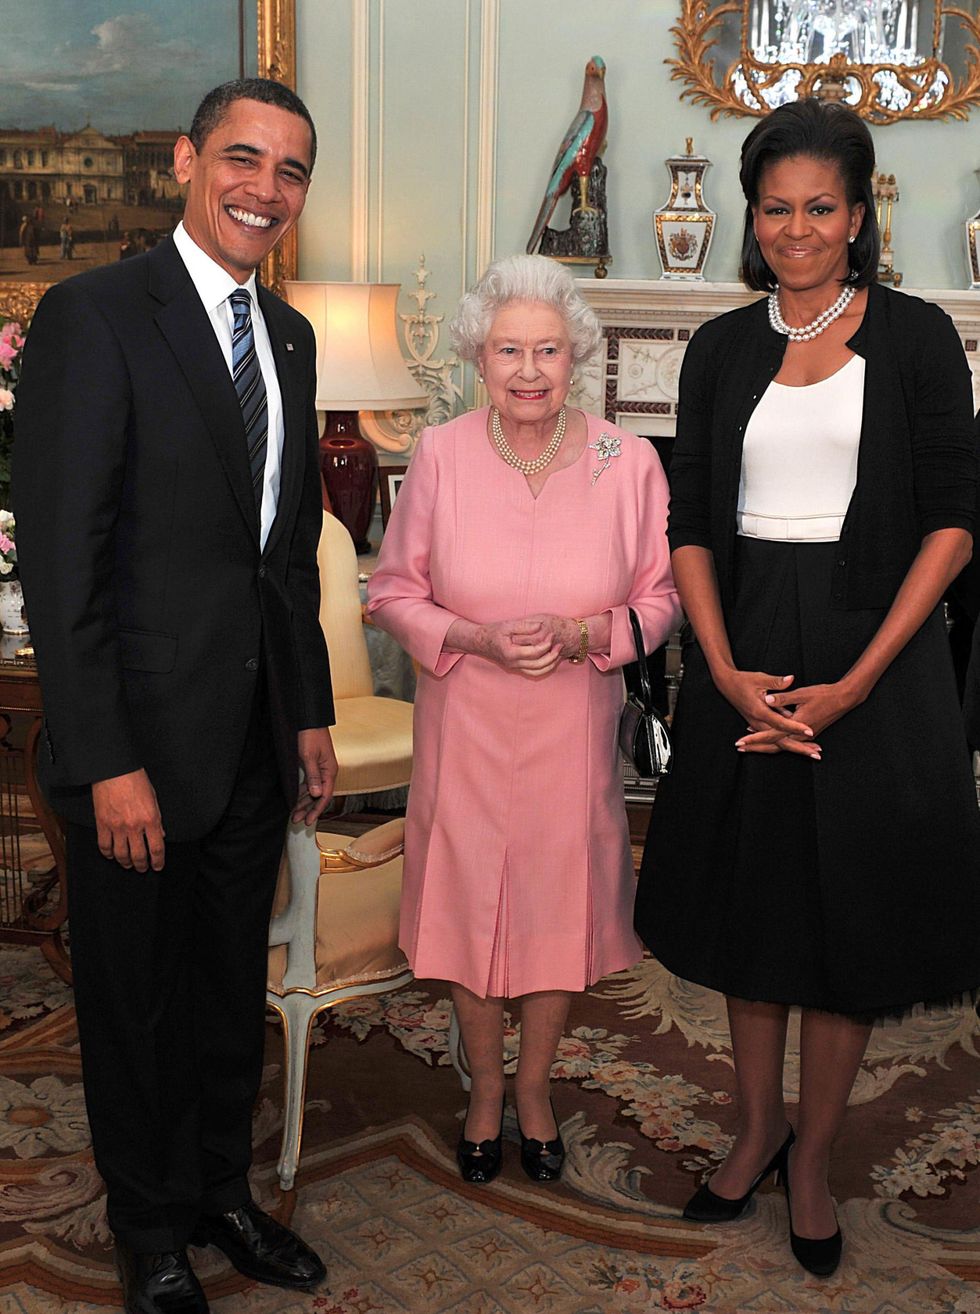 <p><strong data-verified="redactor" data-redactor-tag="strong">When: </strong>April 1, 2009</p>

<p><strong data-verified="redactor" data-redactor-tag="strong">Where: </strong>With Queen Elizabeth II at a Buckingham Palace reception in London</p>

<p><strong data-verified="redactor" data-redactor-tag="strong">Wearing: </strong>Isabel Toledo dress, Alaïa cashmere cardigan, double stranded pearls</p>

<p><strong data-verified="redactor" data-redactor-tag="strong"></strong><strong data-verified="redactor" data-redactor-tag="strong">Why it mattered: </strong>On that same trip to London, Michelle met the Queen—in her signature cardigan. Not everyone was a fan: At the time Oscar de la Renta told <a href="http://www.wwd.com/fashion-news/major-designers-wait-for-first-ladys-call-2090453?src=bblast/040309">Women's Wear Daily</a>, "You don't...go to Buckingham Palace in a sweater." (Coincidence? The First Lady didn't wear Oscar de la Renta until 2014, shortly before the designer passed away.) Dincuff hails this as yet another example of Michelle's ability to represent the average American woman—in a chic and elegant way. "I think the whole idea of wearing a sweater instead of a jacket is very American," she says. "She's the epitome of what a modern American working mother wants to look like and she stayed true to that look and to herself, even at very high-profile appearances."</p>